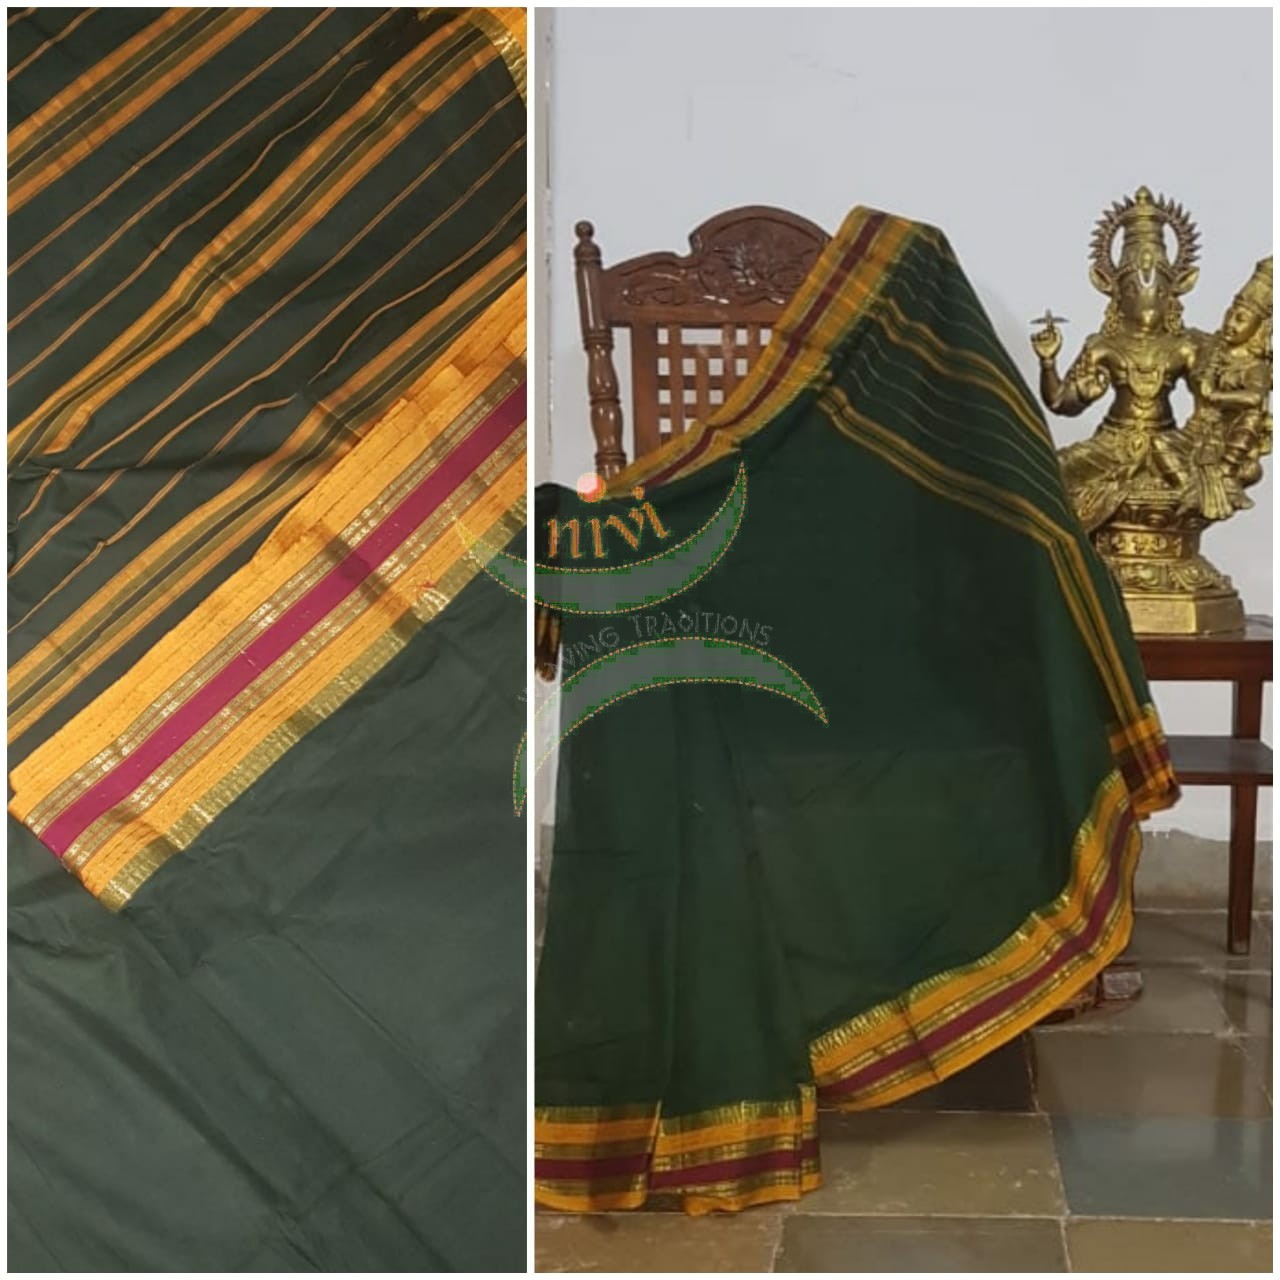 Bottle green handloom narayanpet cotton saree with contrasting mustard borders and striped pallu. The Saree comes without blouse.